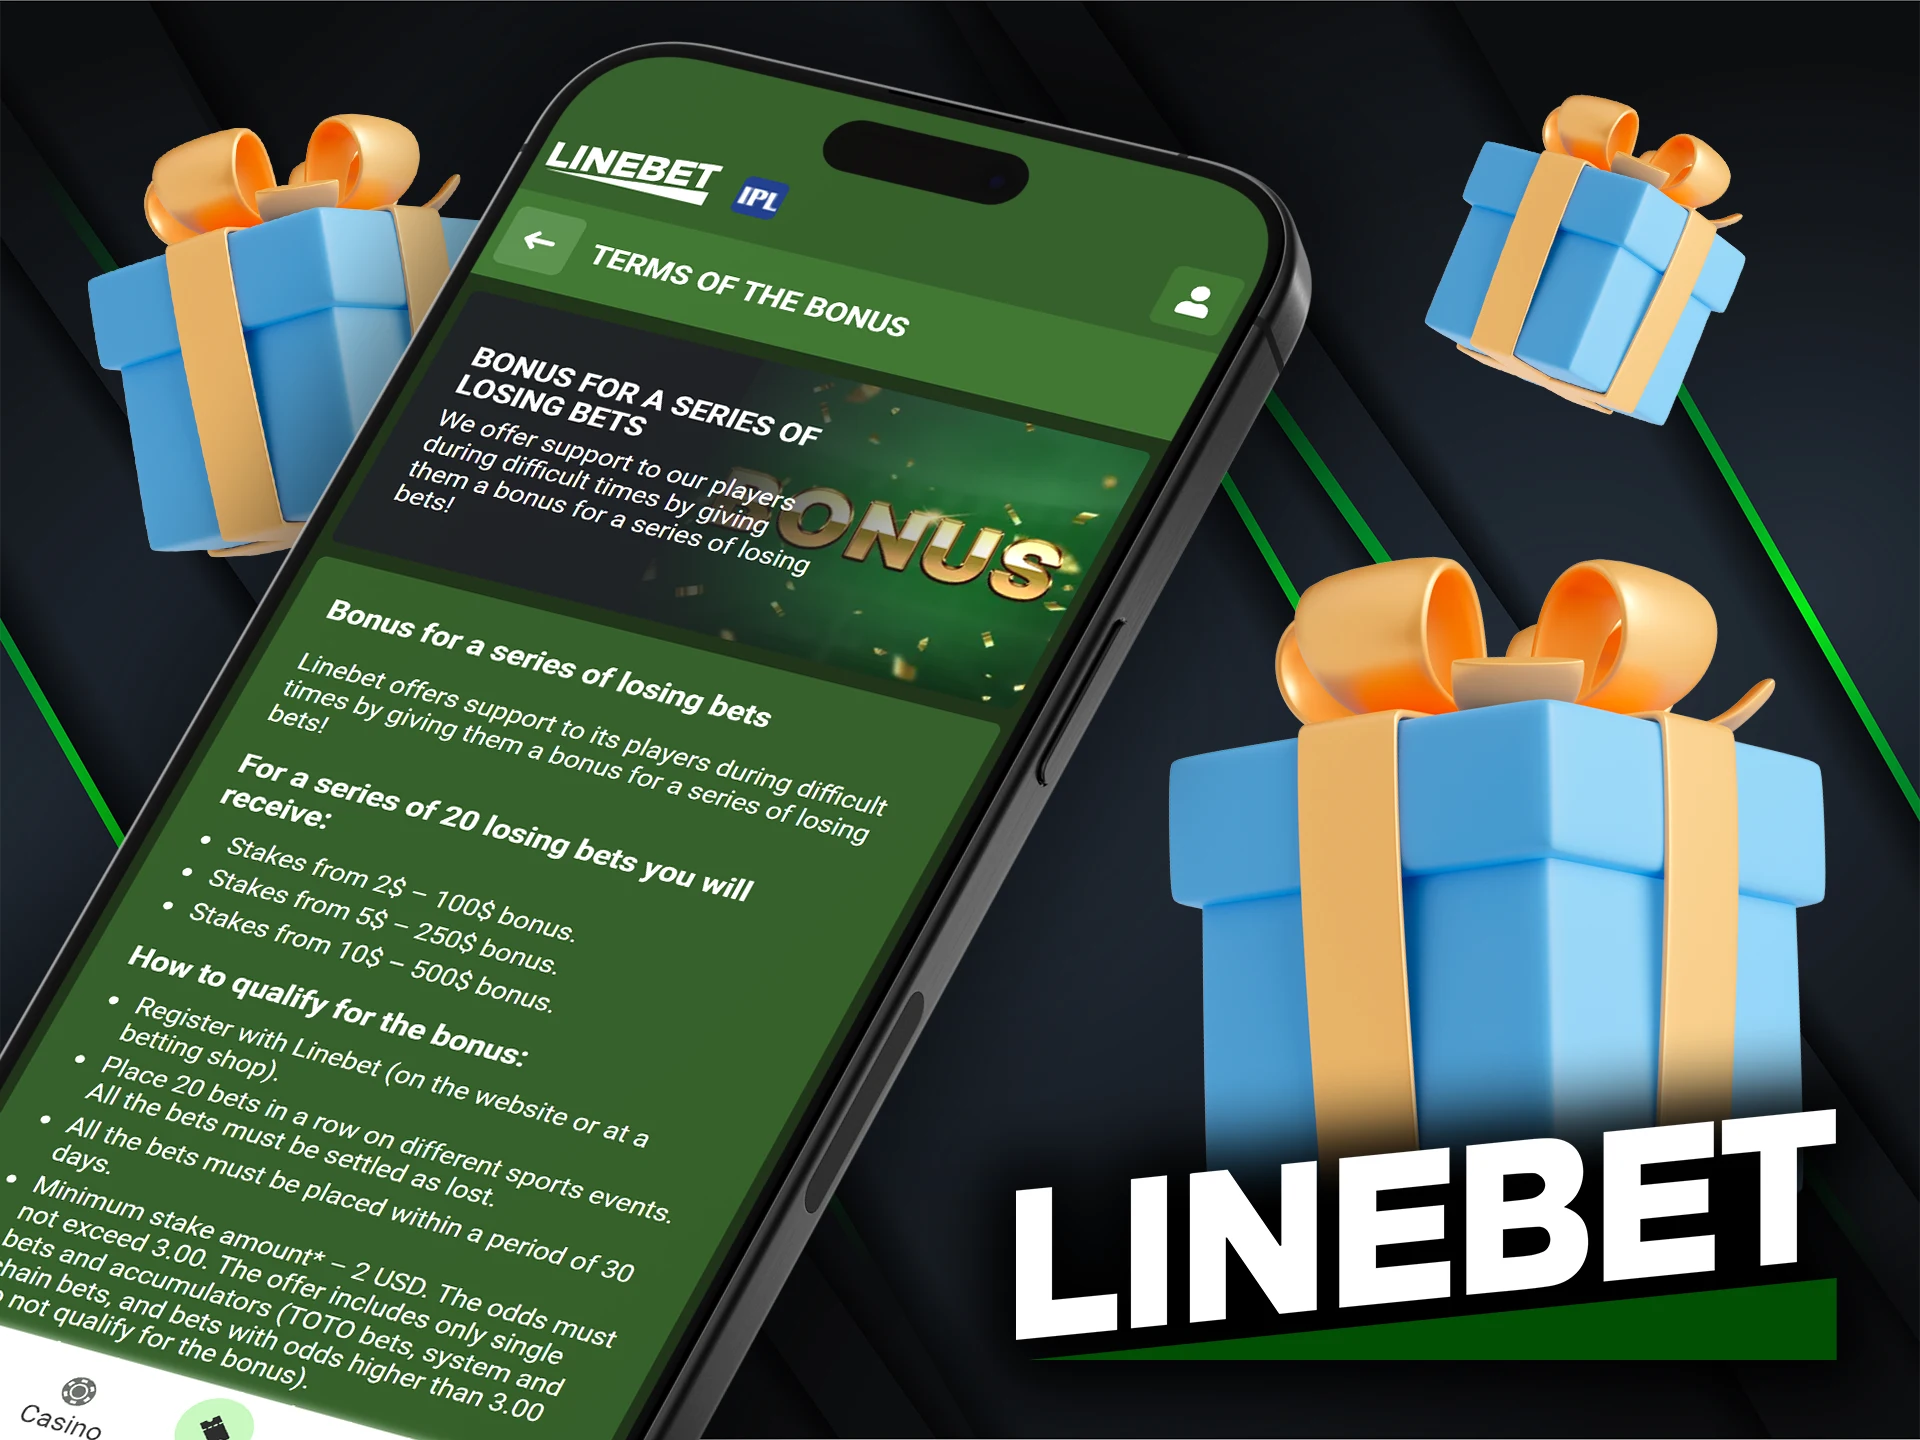 Insure your bet at Linebet and get a bonus for a series of losing bets.